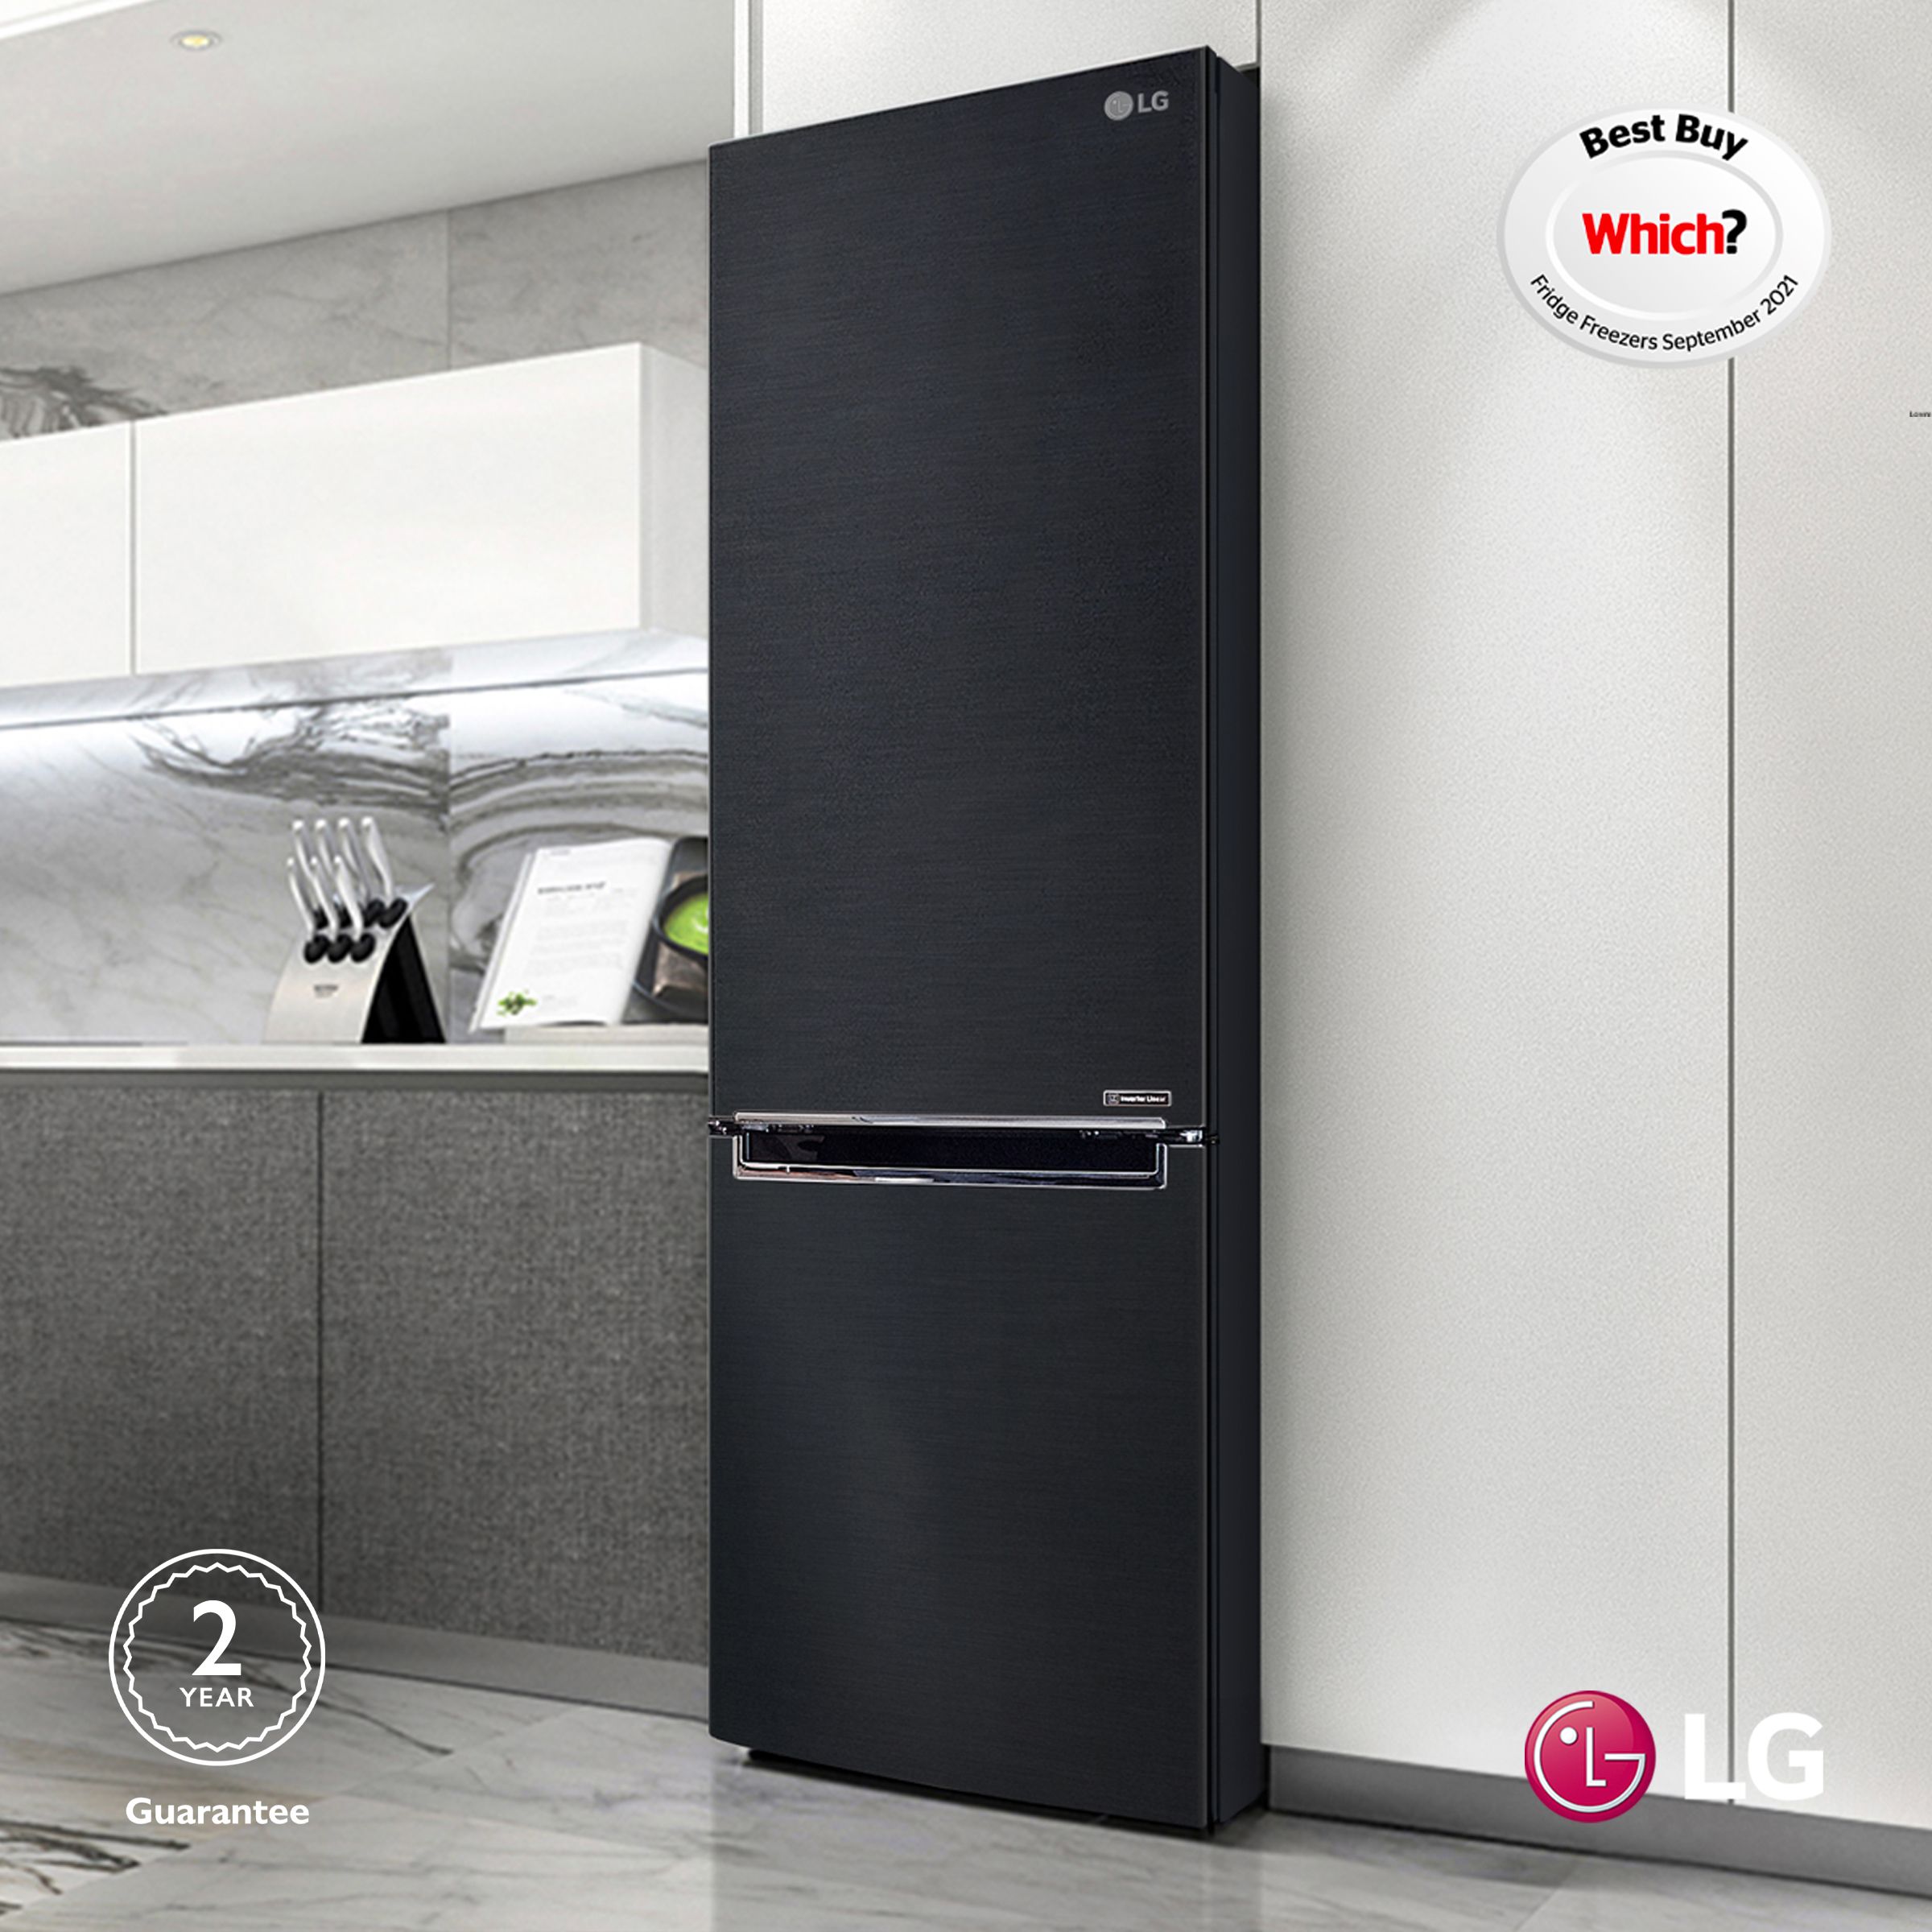 Save on energy costs with an LG A Rated fridge freezer